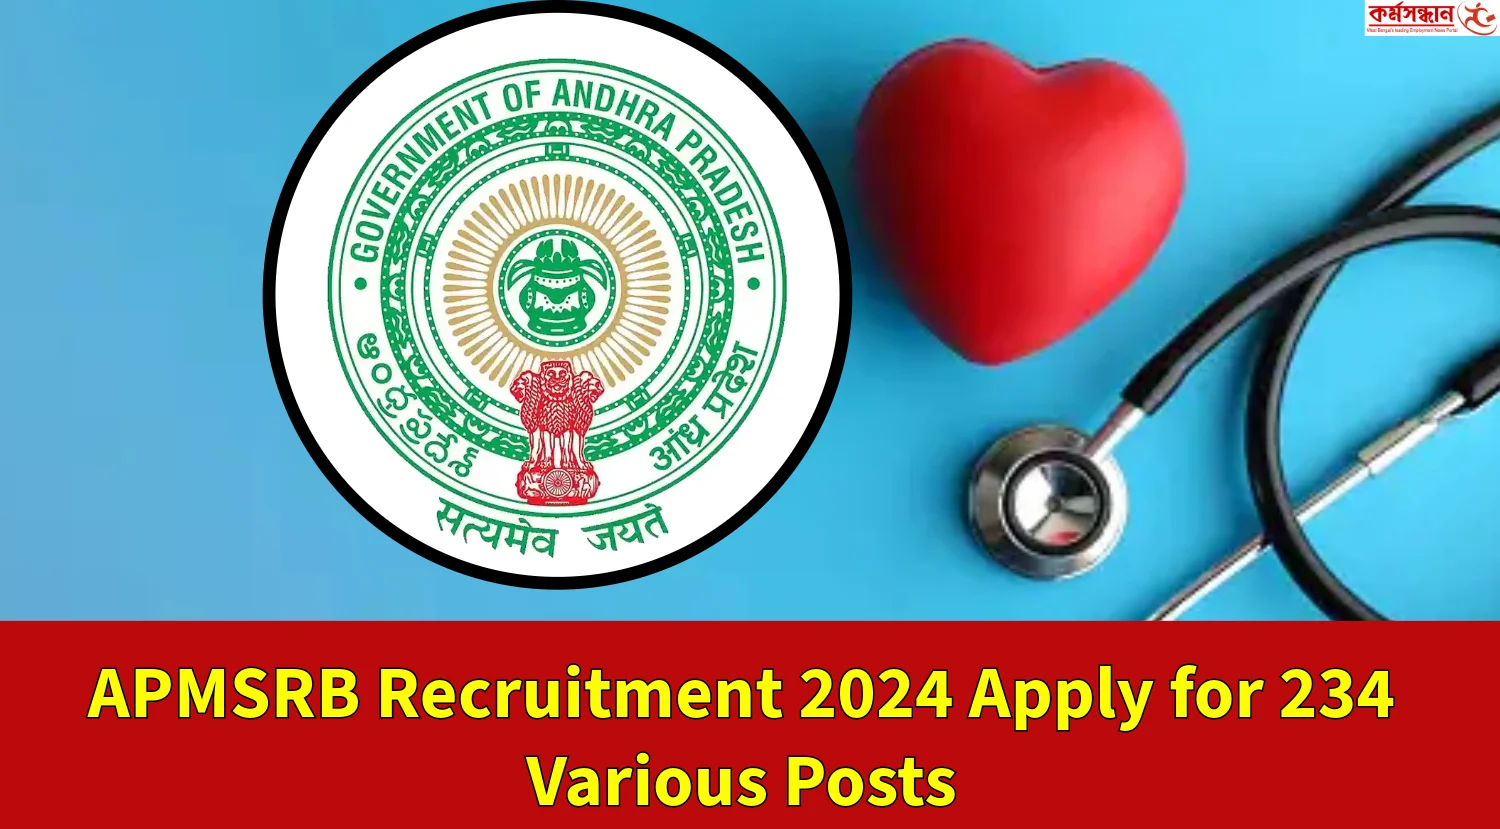 APMSRB Recruitment 2024 Apply for 234 Various Posts